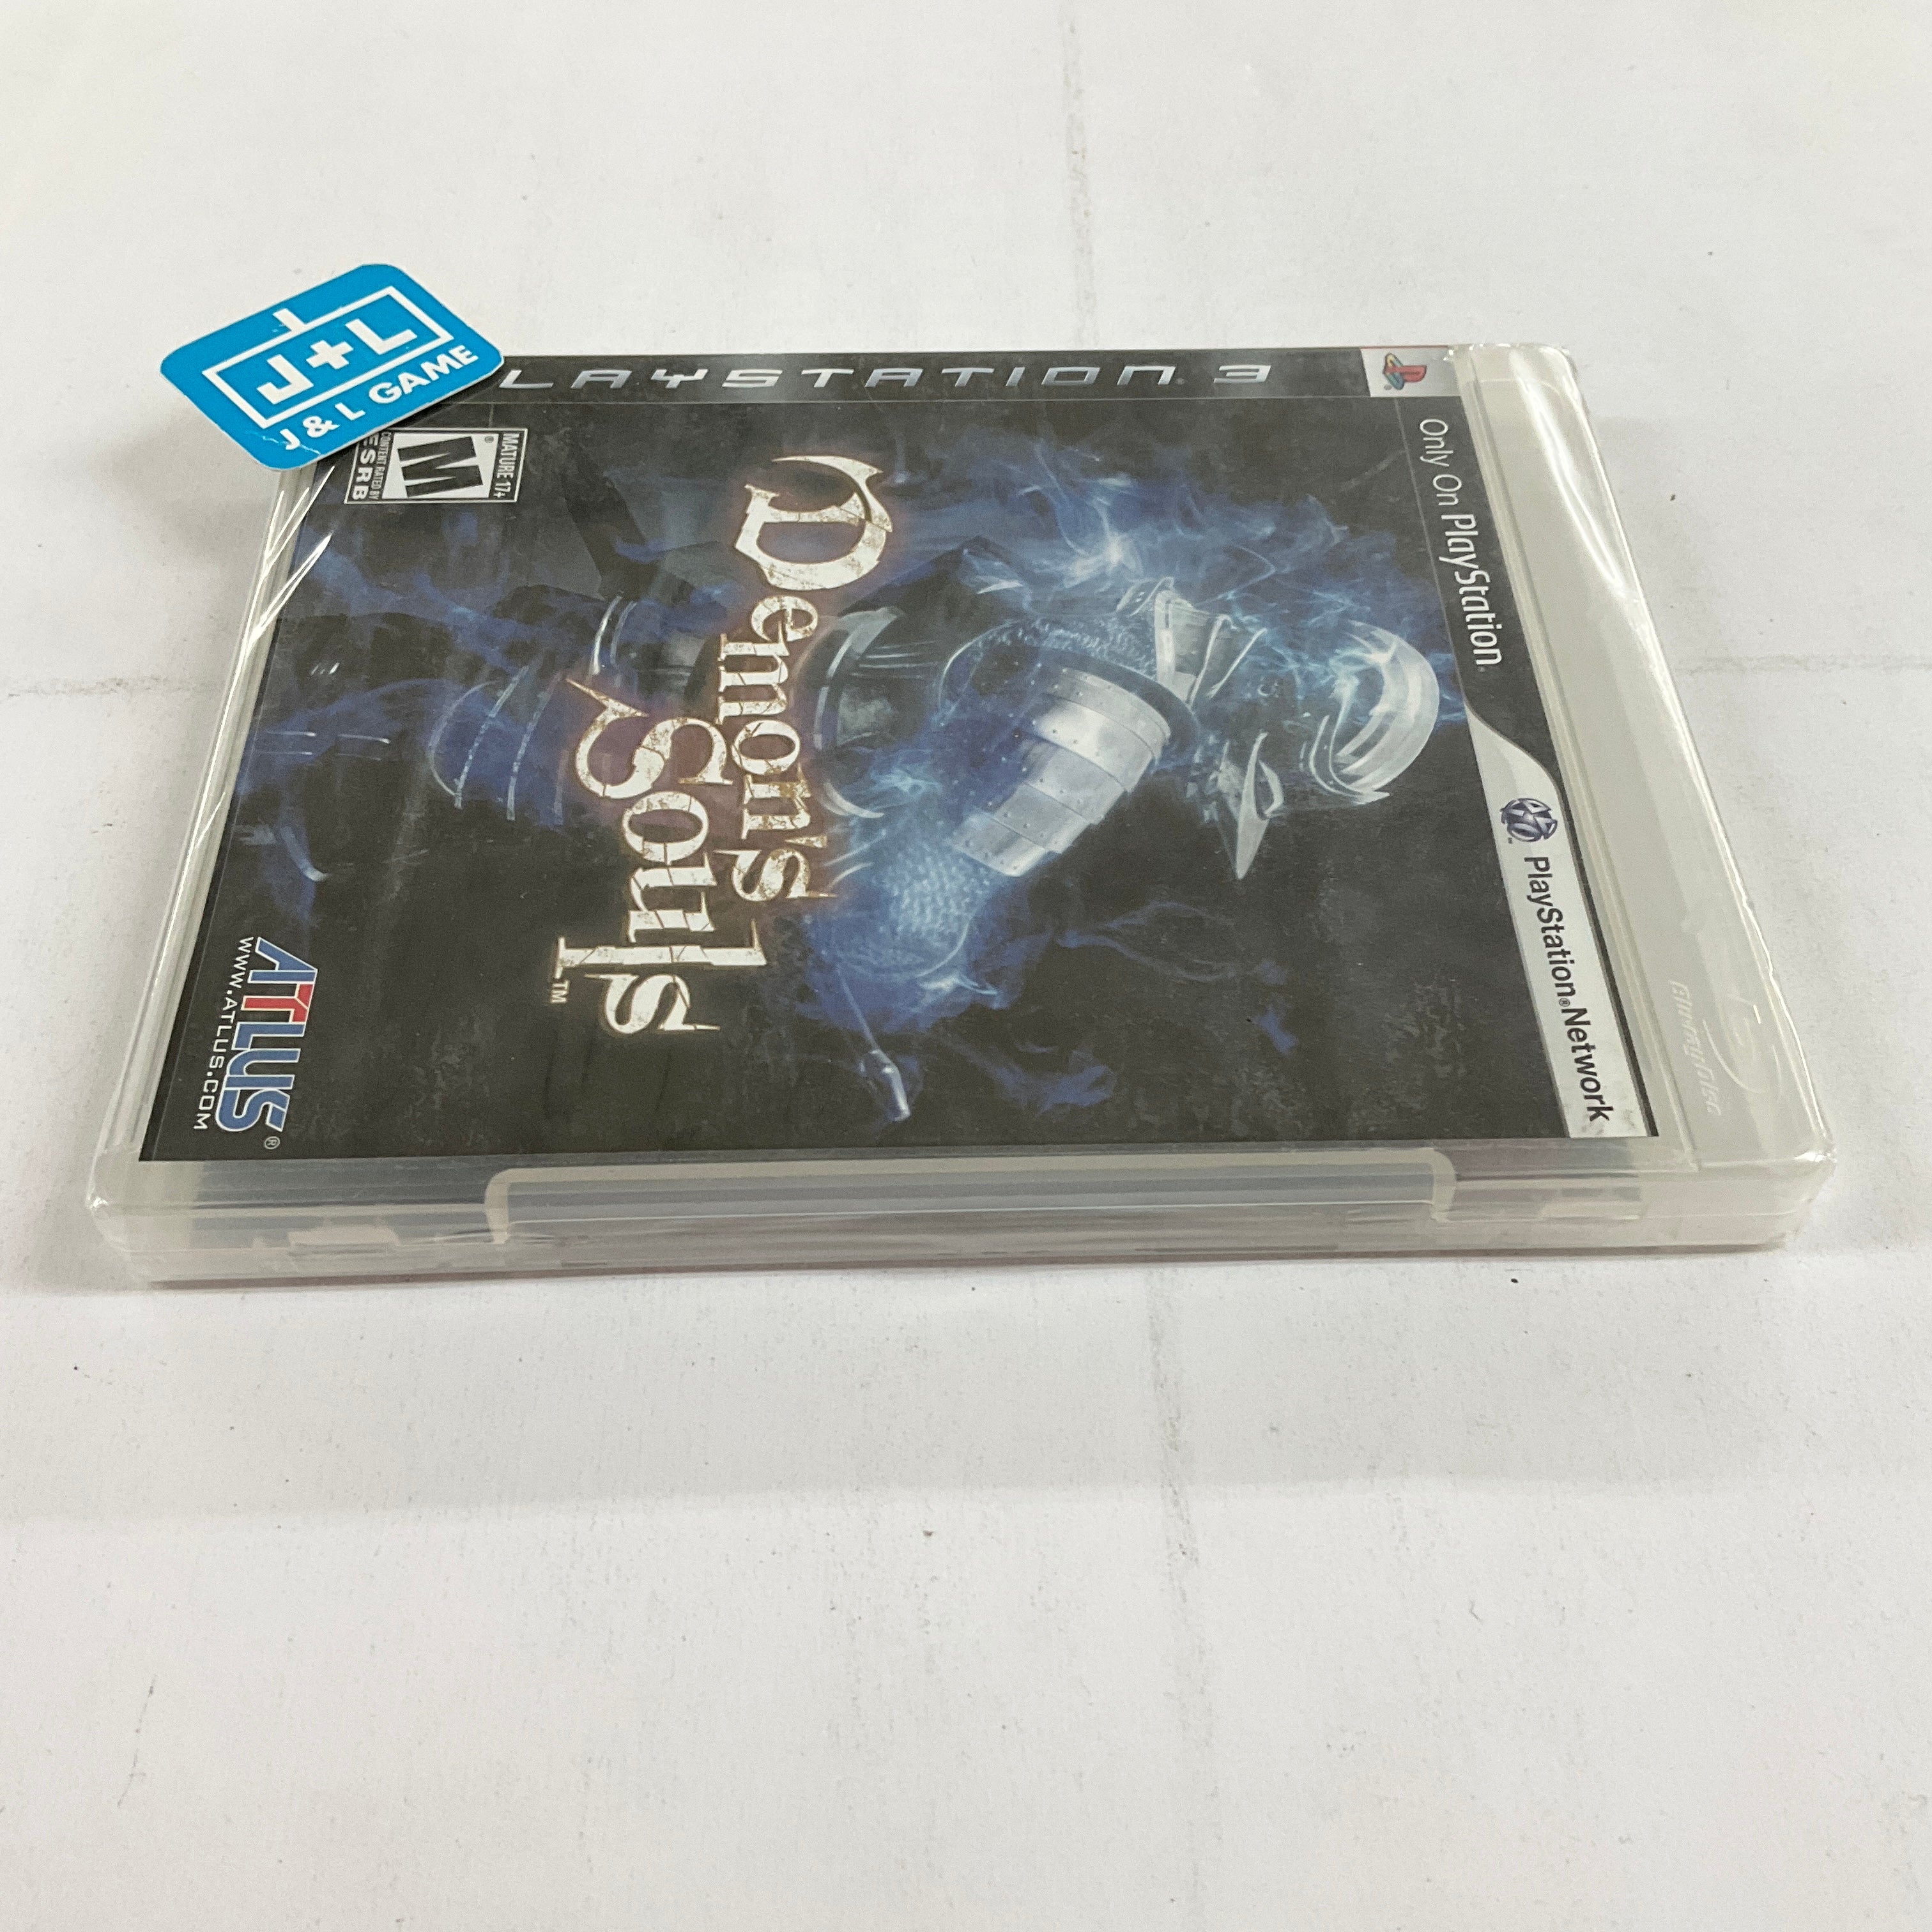 Demon's Souls - (PS3) PlayStation 3 Video Games Atlus   